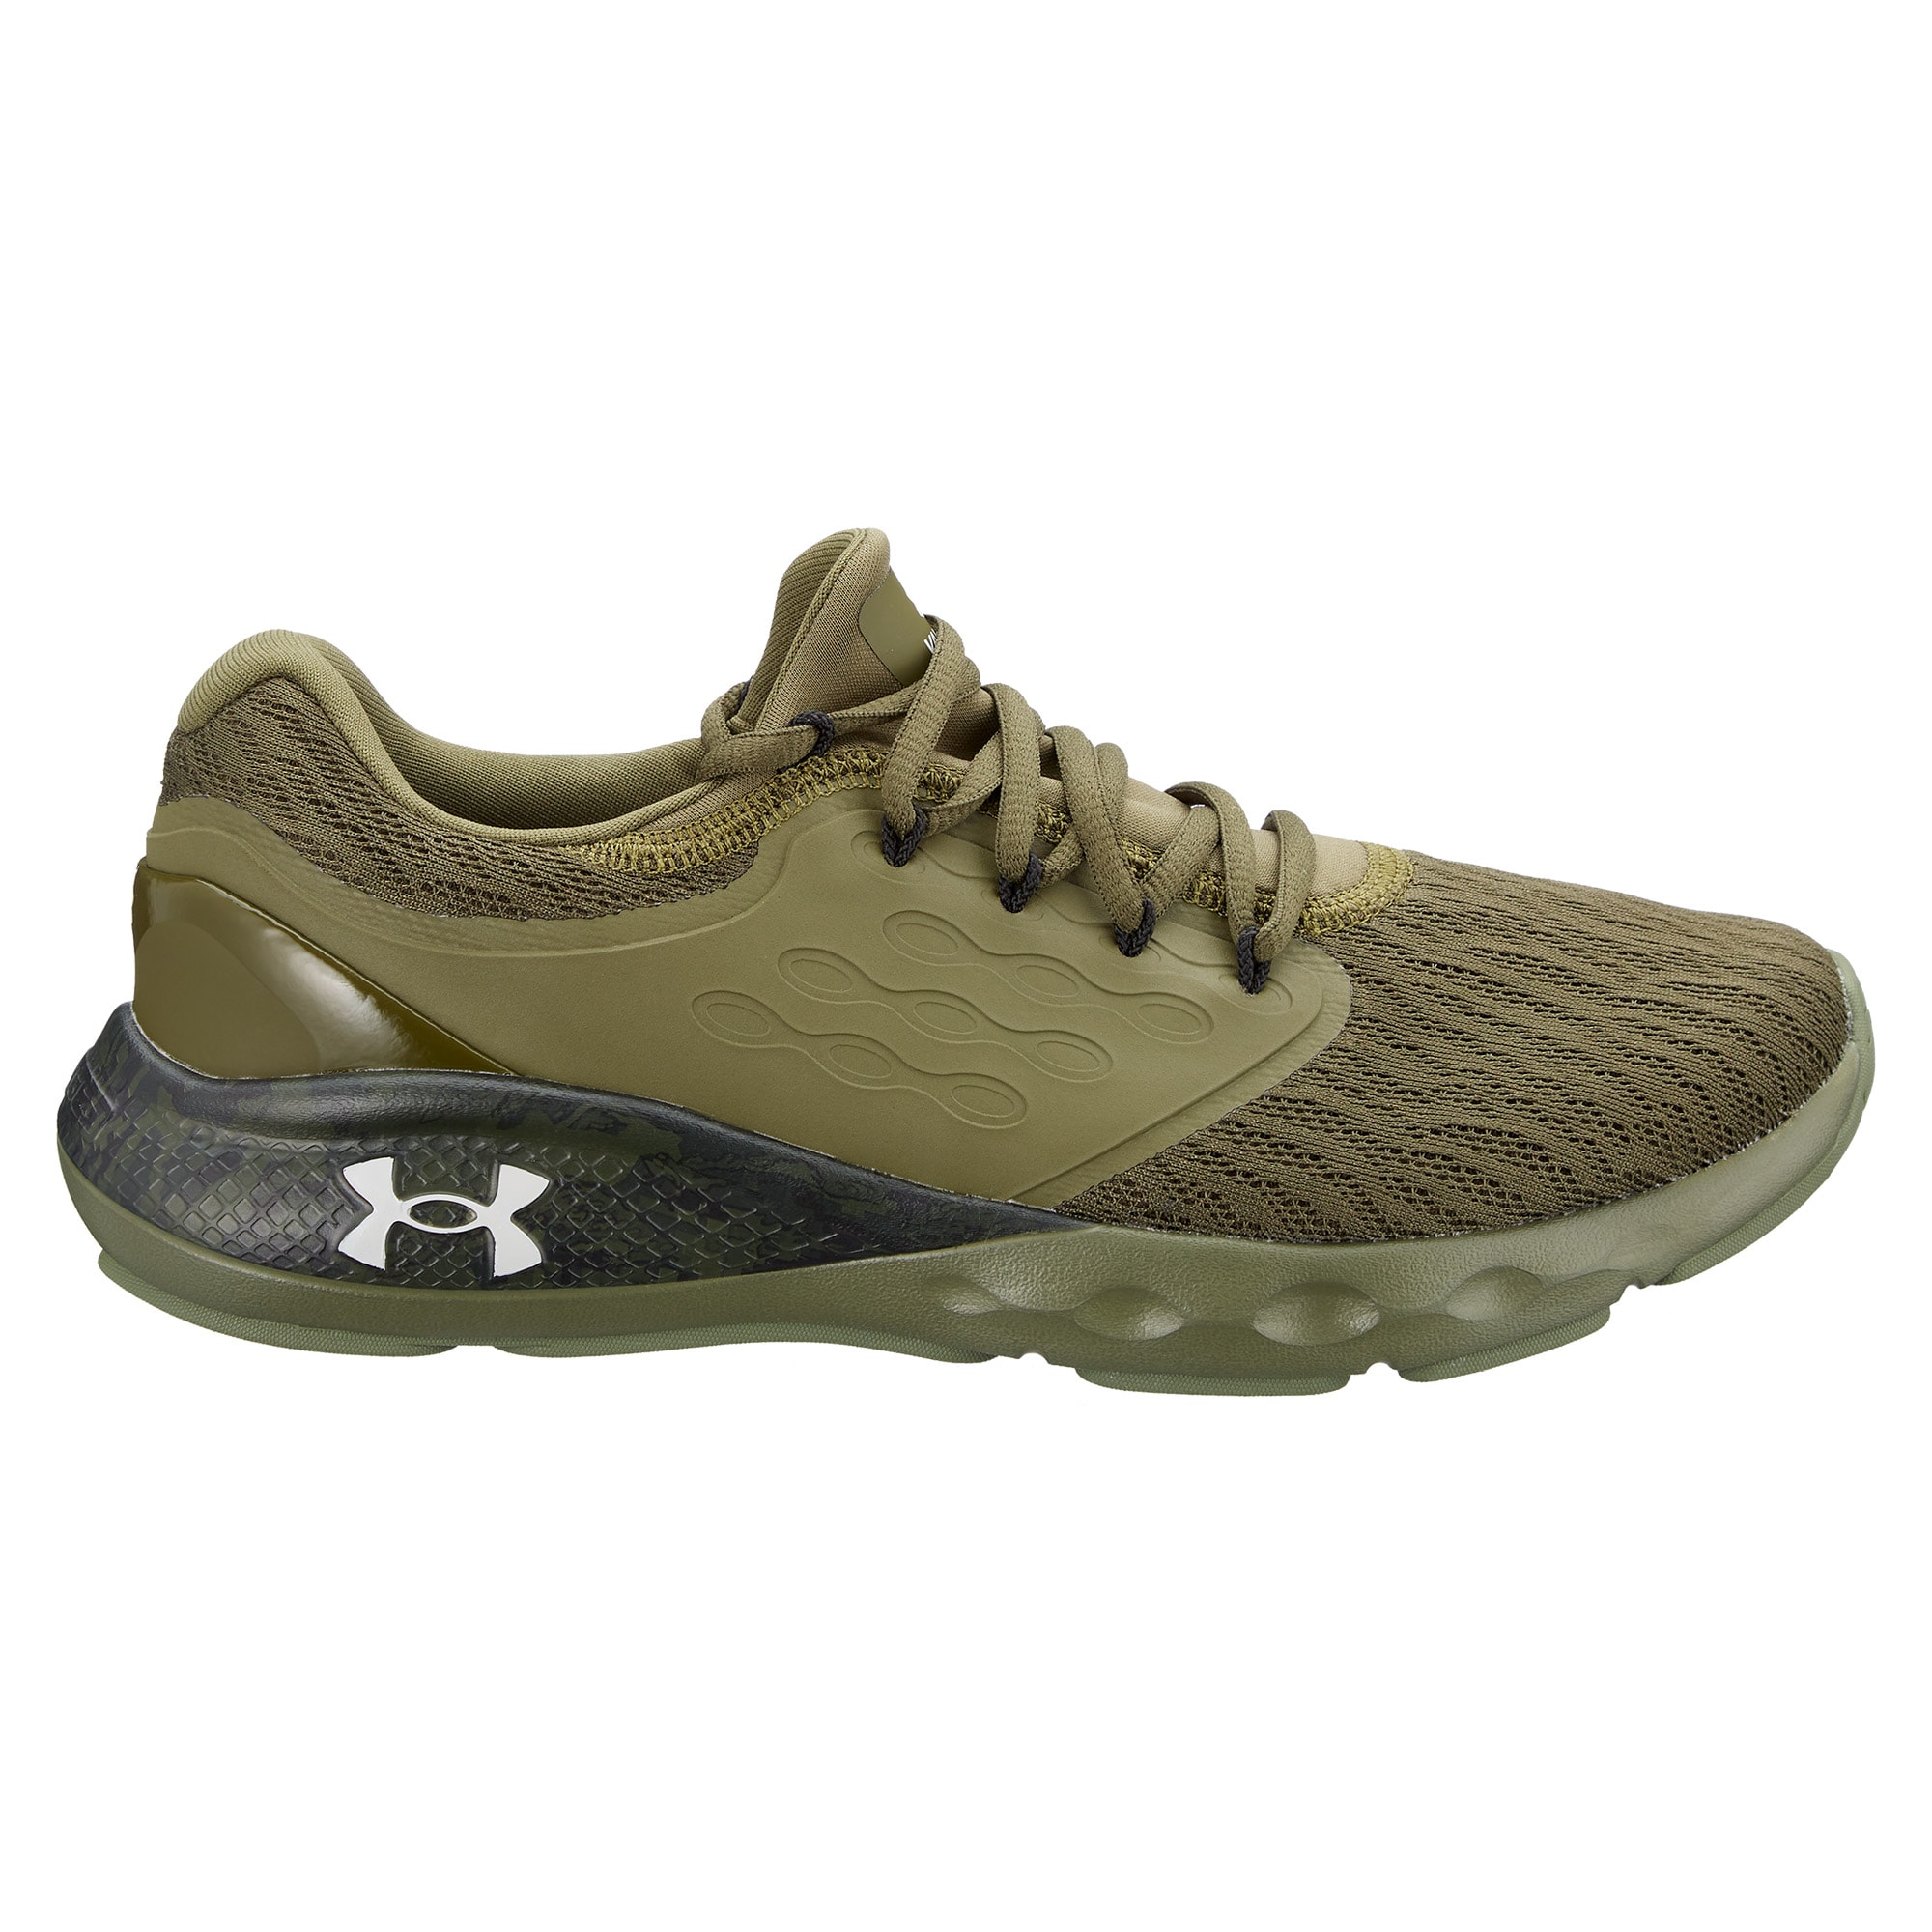 Purchase the Under Armour Shoe Charged Vantage Camo marine OD gr